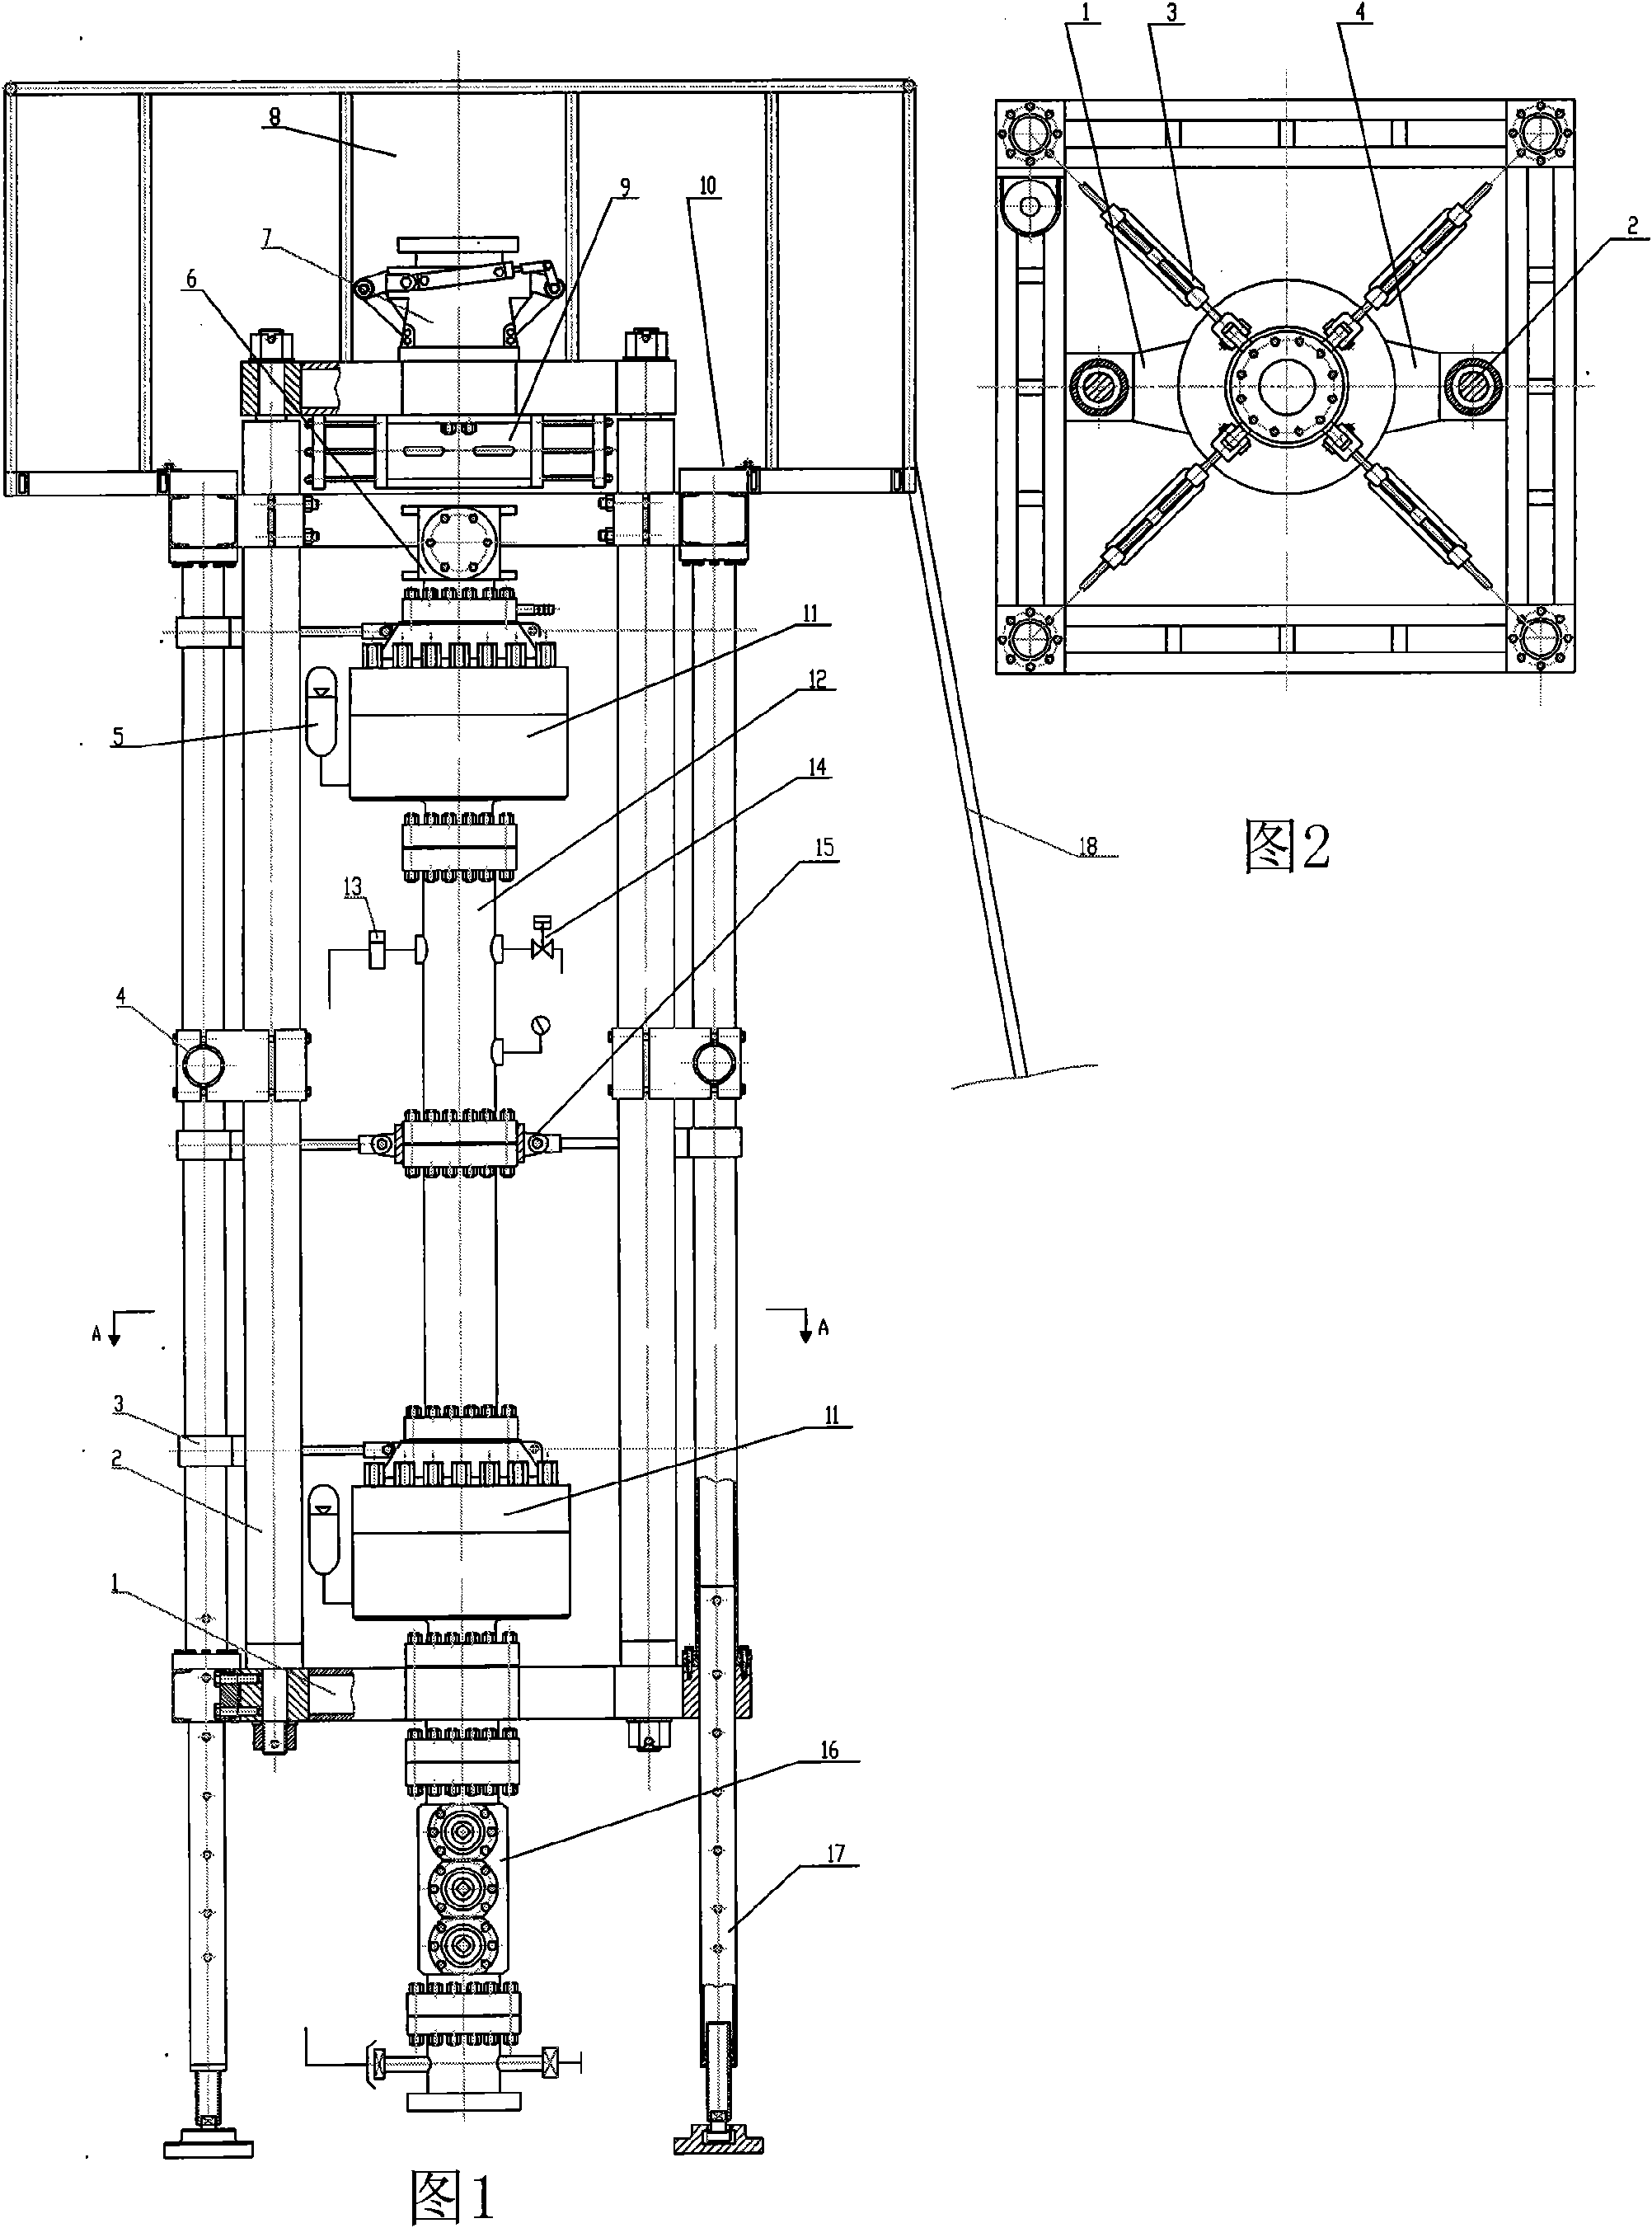 Snubbing serving device of combined type hydraulic oil-water well